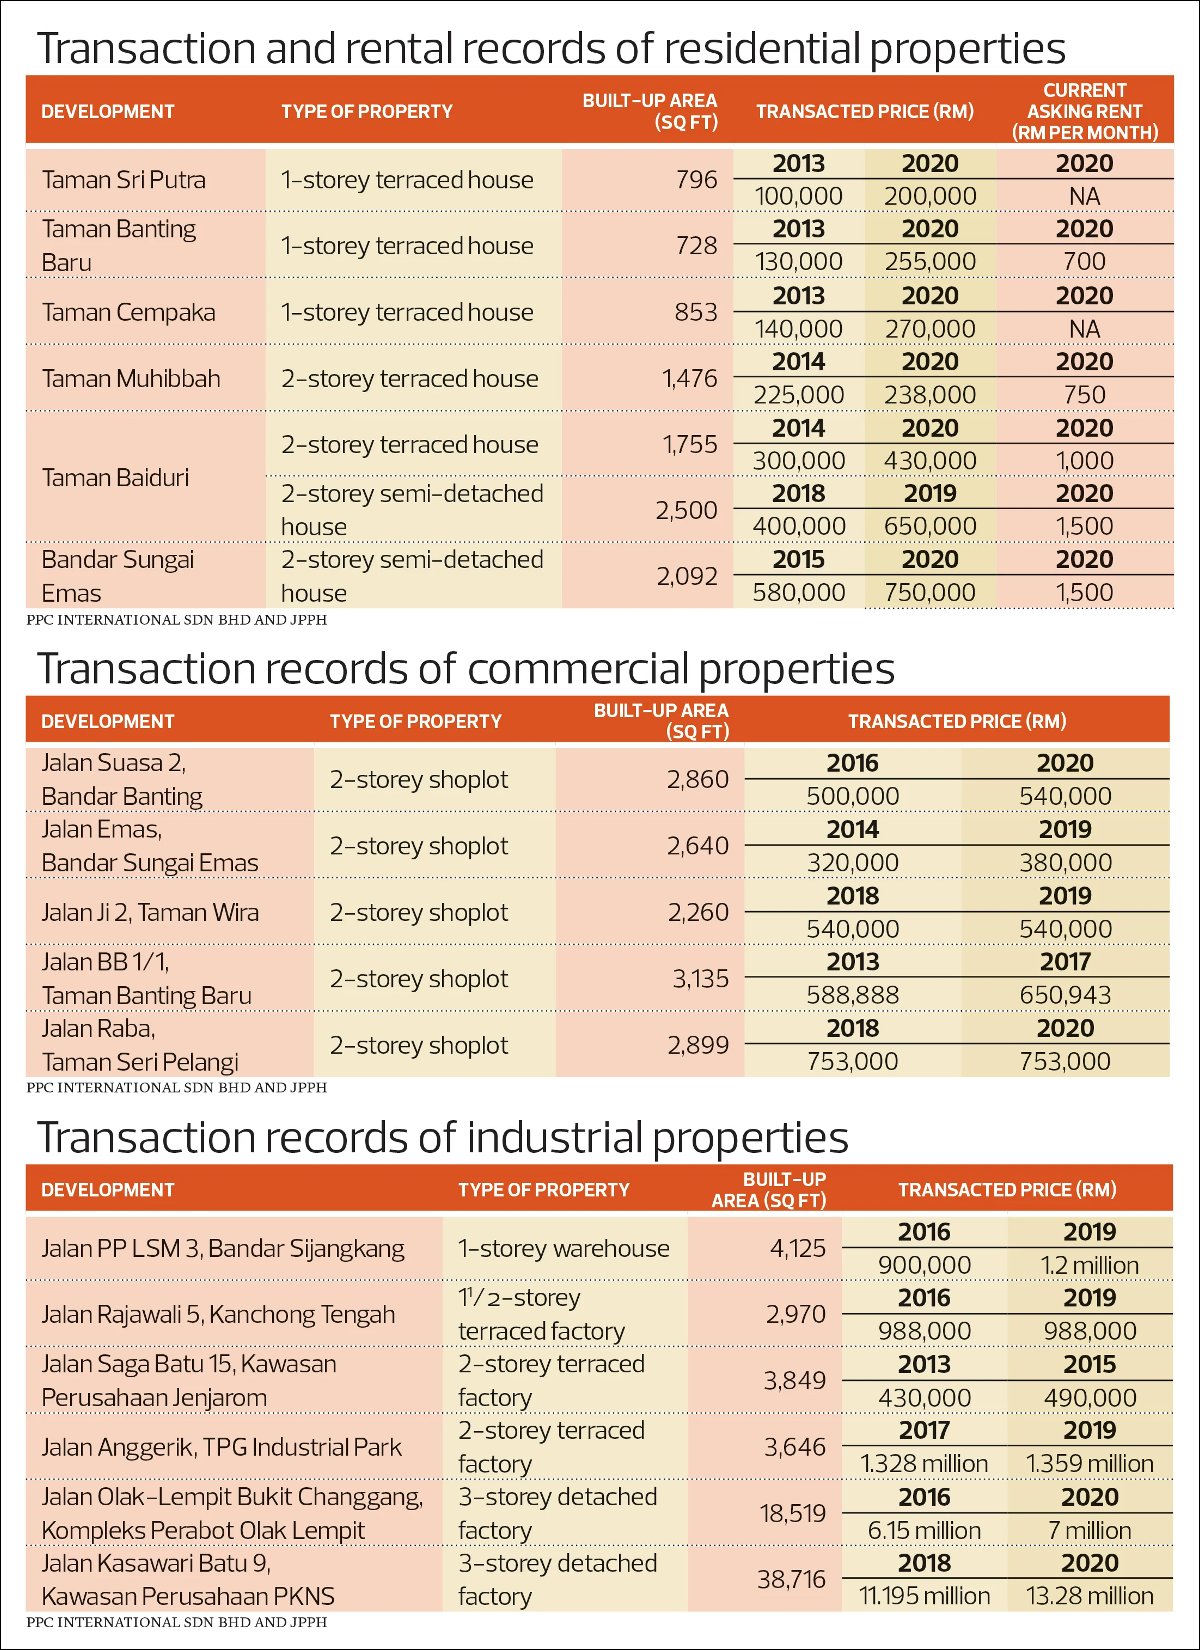 Transactions and rental records